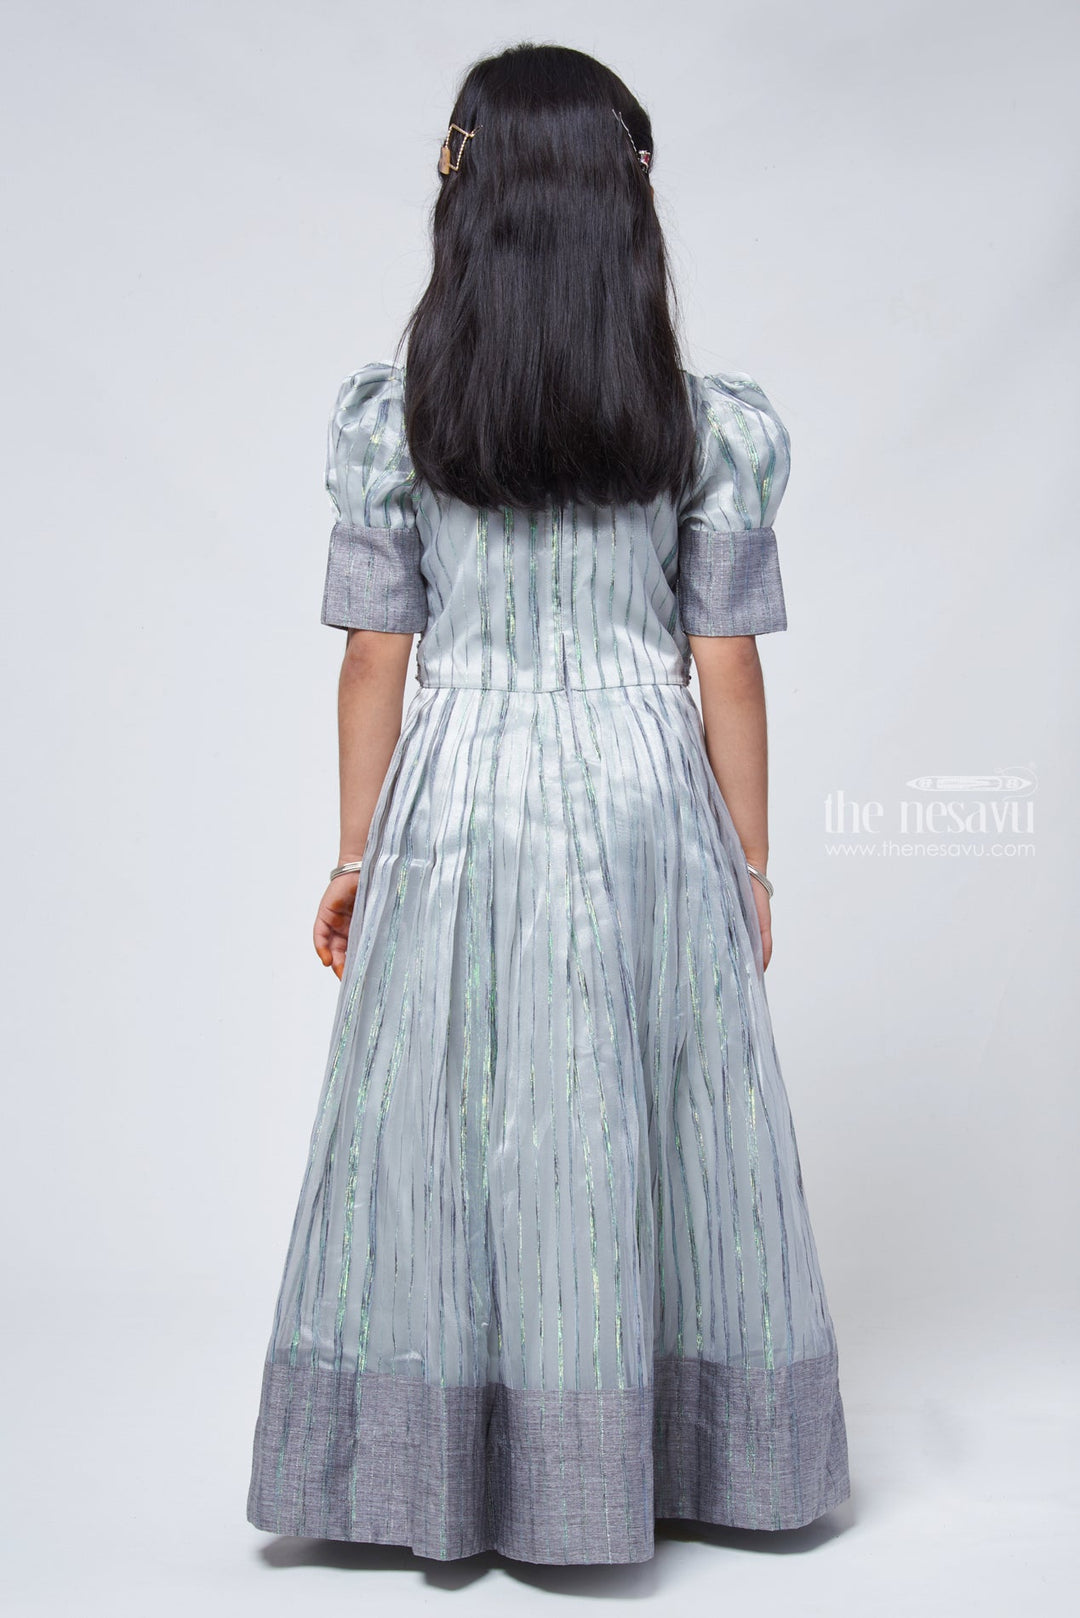 The Nesavu Party Gown Grey Organza Party Gown Dress with Faux Mirror and Fine Stone Embellished Hip Band Nesavu Grey Organza Party Gown Dress with Faux Mirror and Fine Stone Embellished Hip Band | The Nesavu